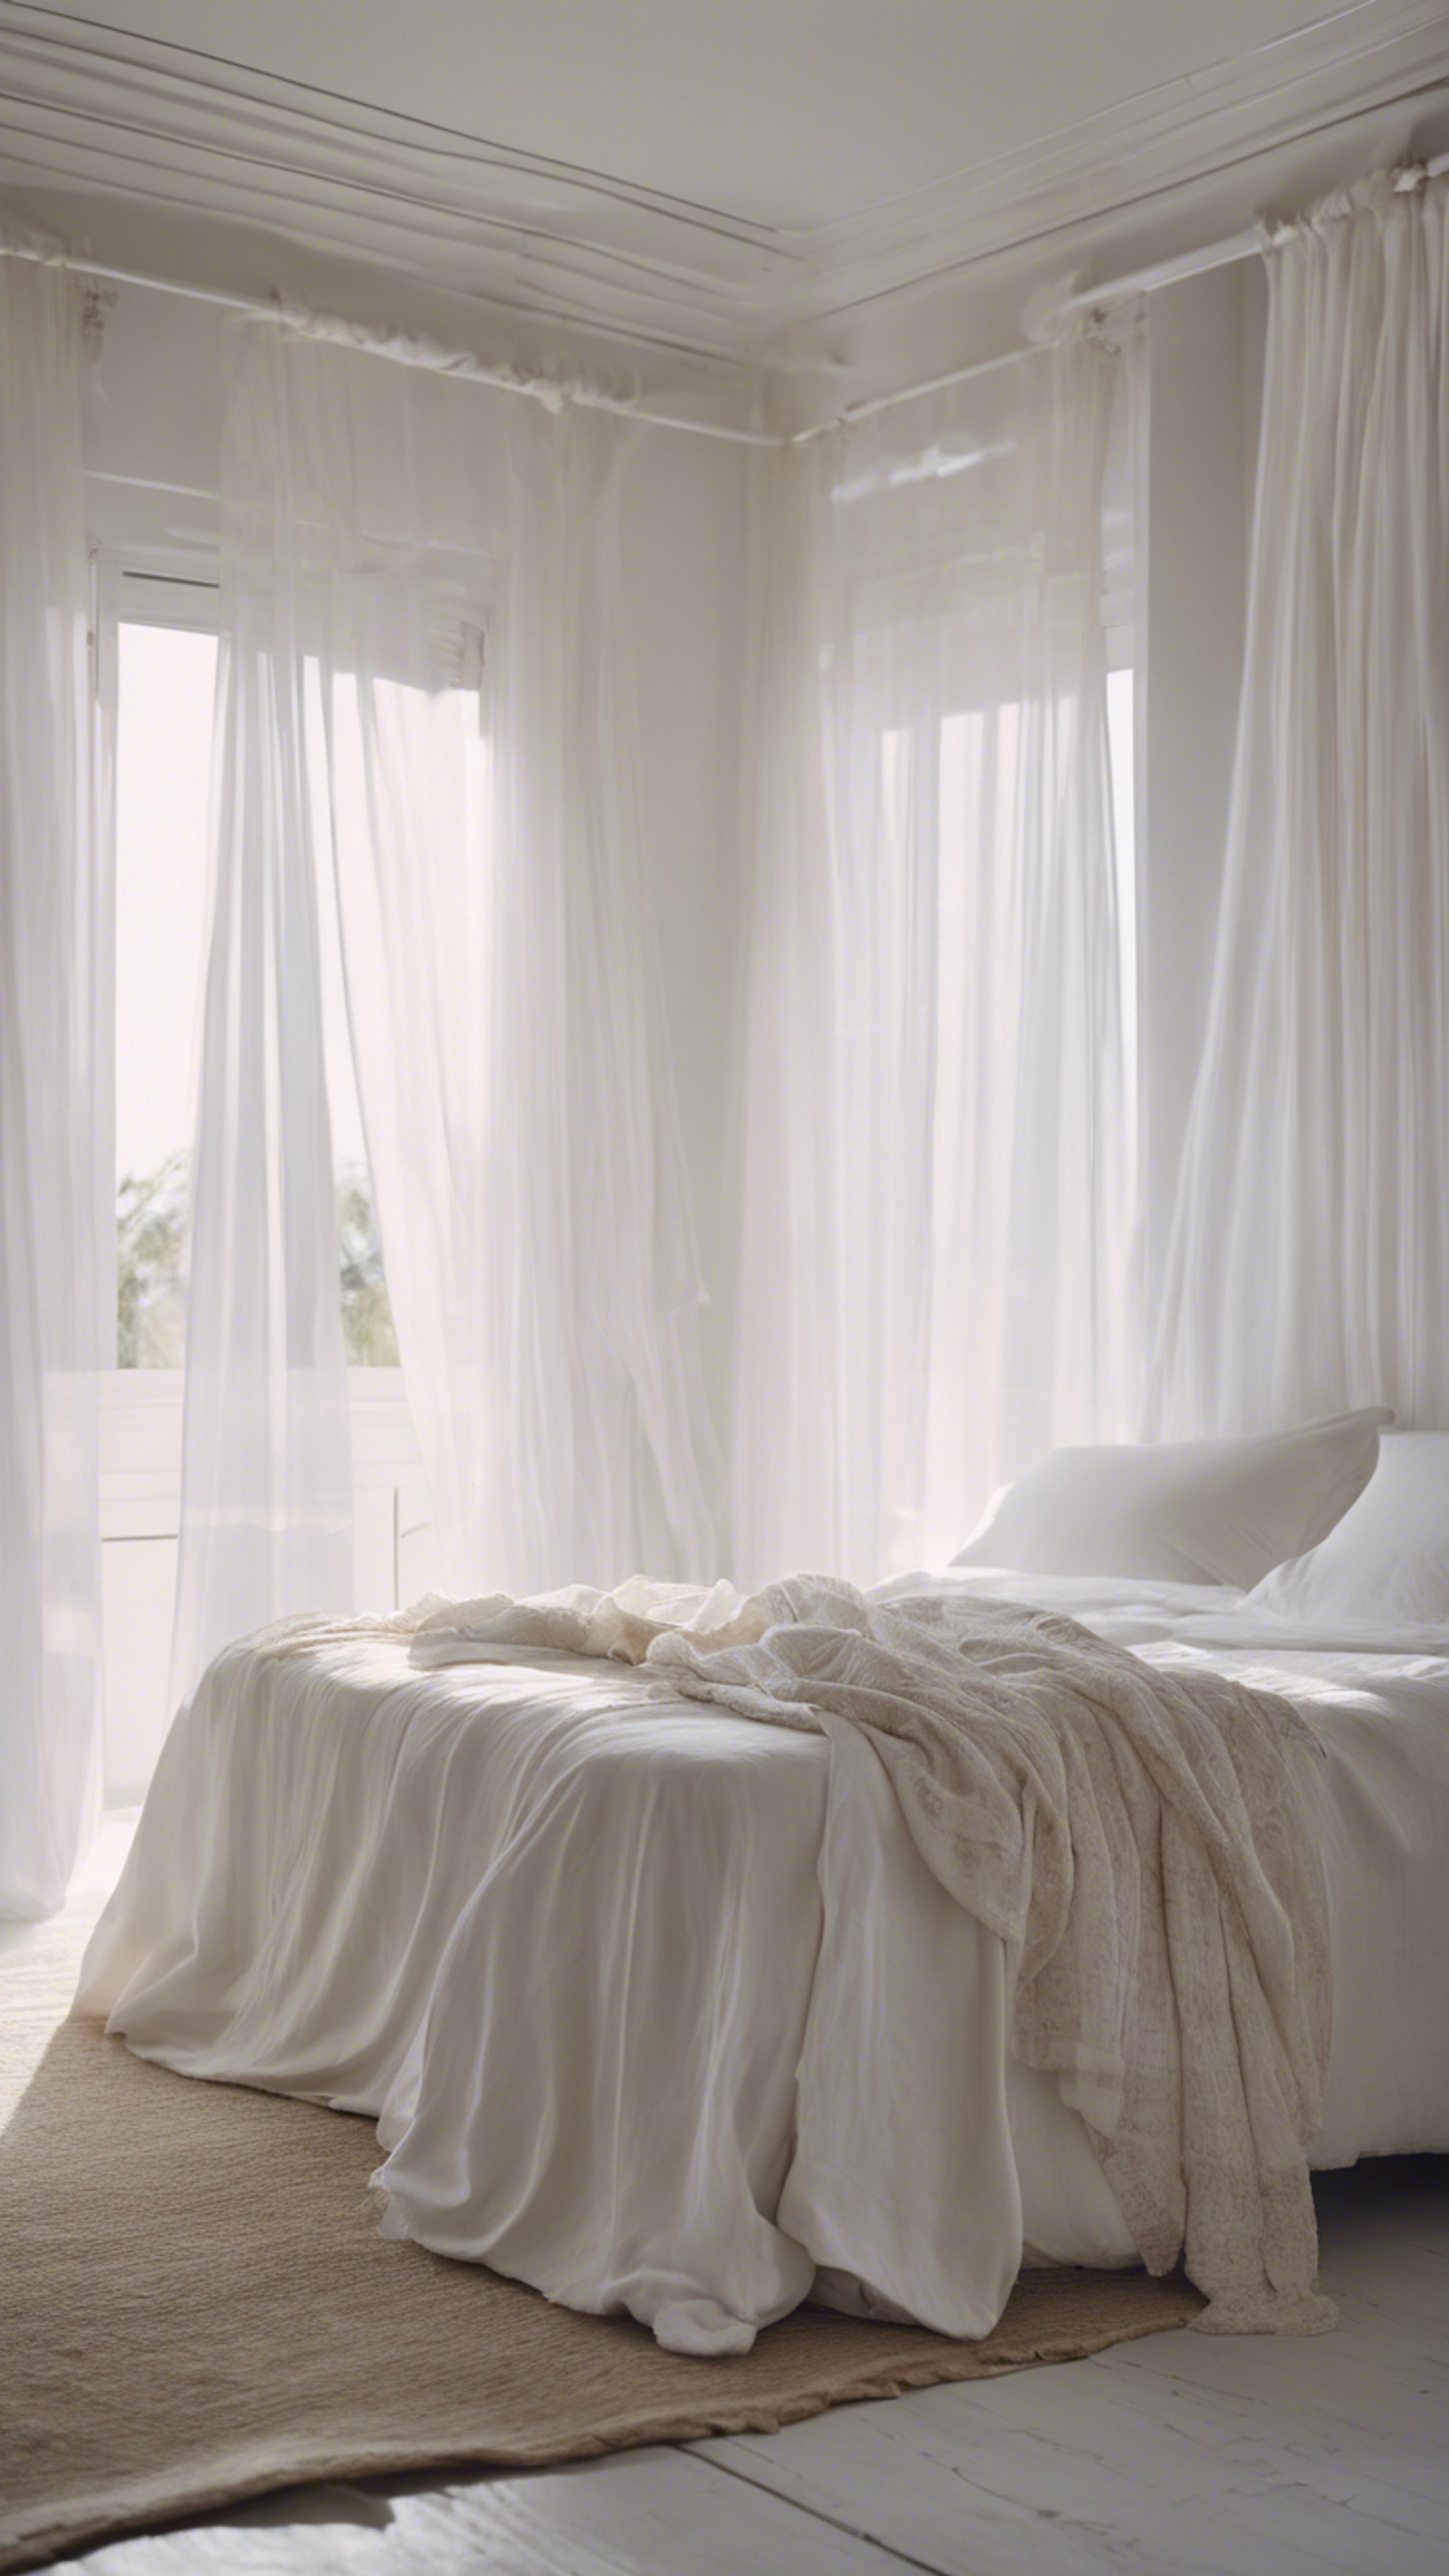 A dreamy white bedroom with sheer curtains blowing in the wind, white bed linens and an array of daylight from the window.壁紙[01f8a65ac1ab4b5d8d2d]